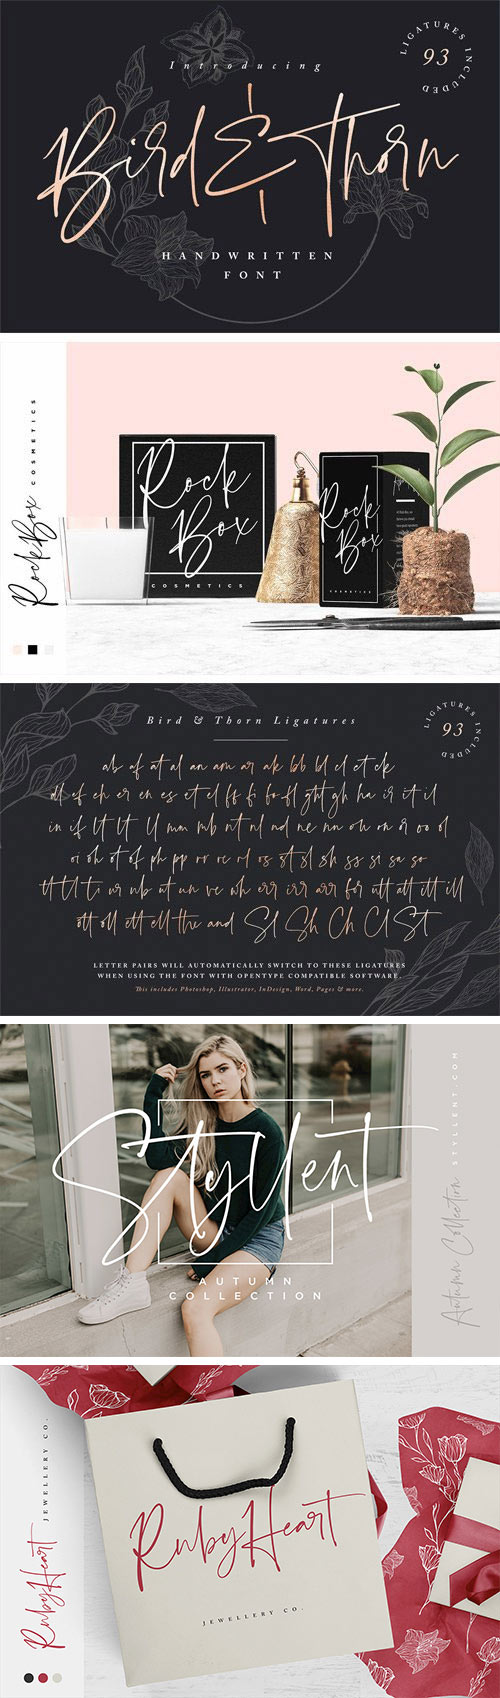 Bird And Thorn Font